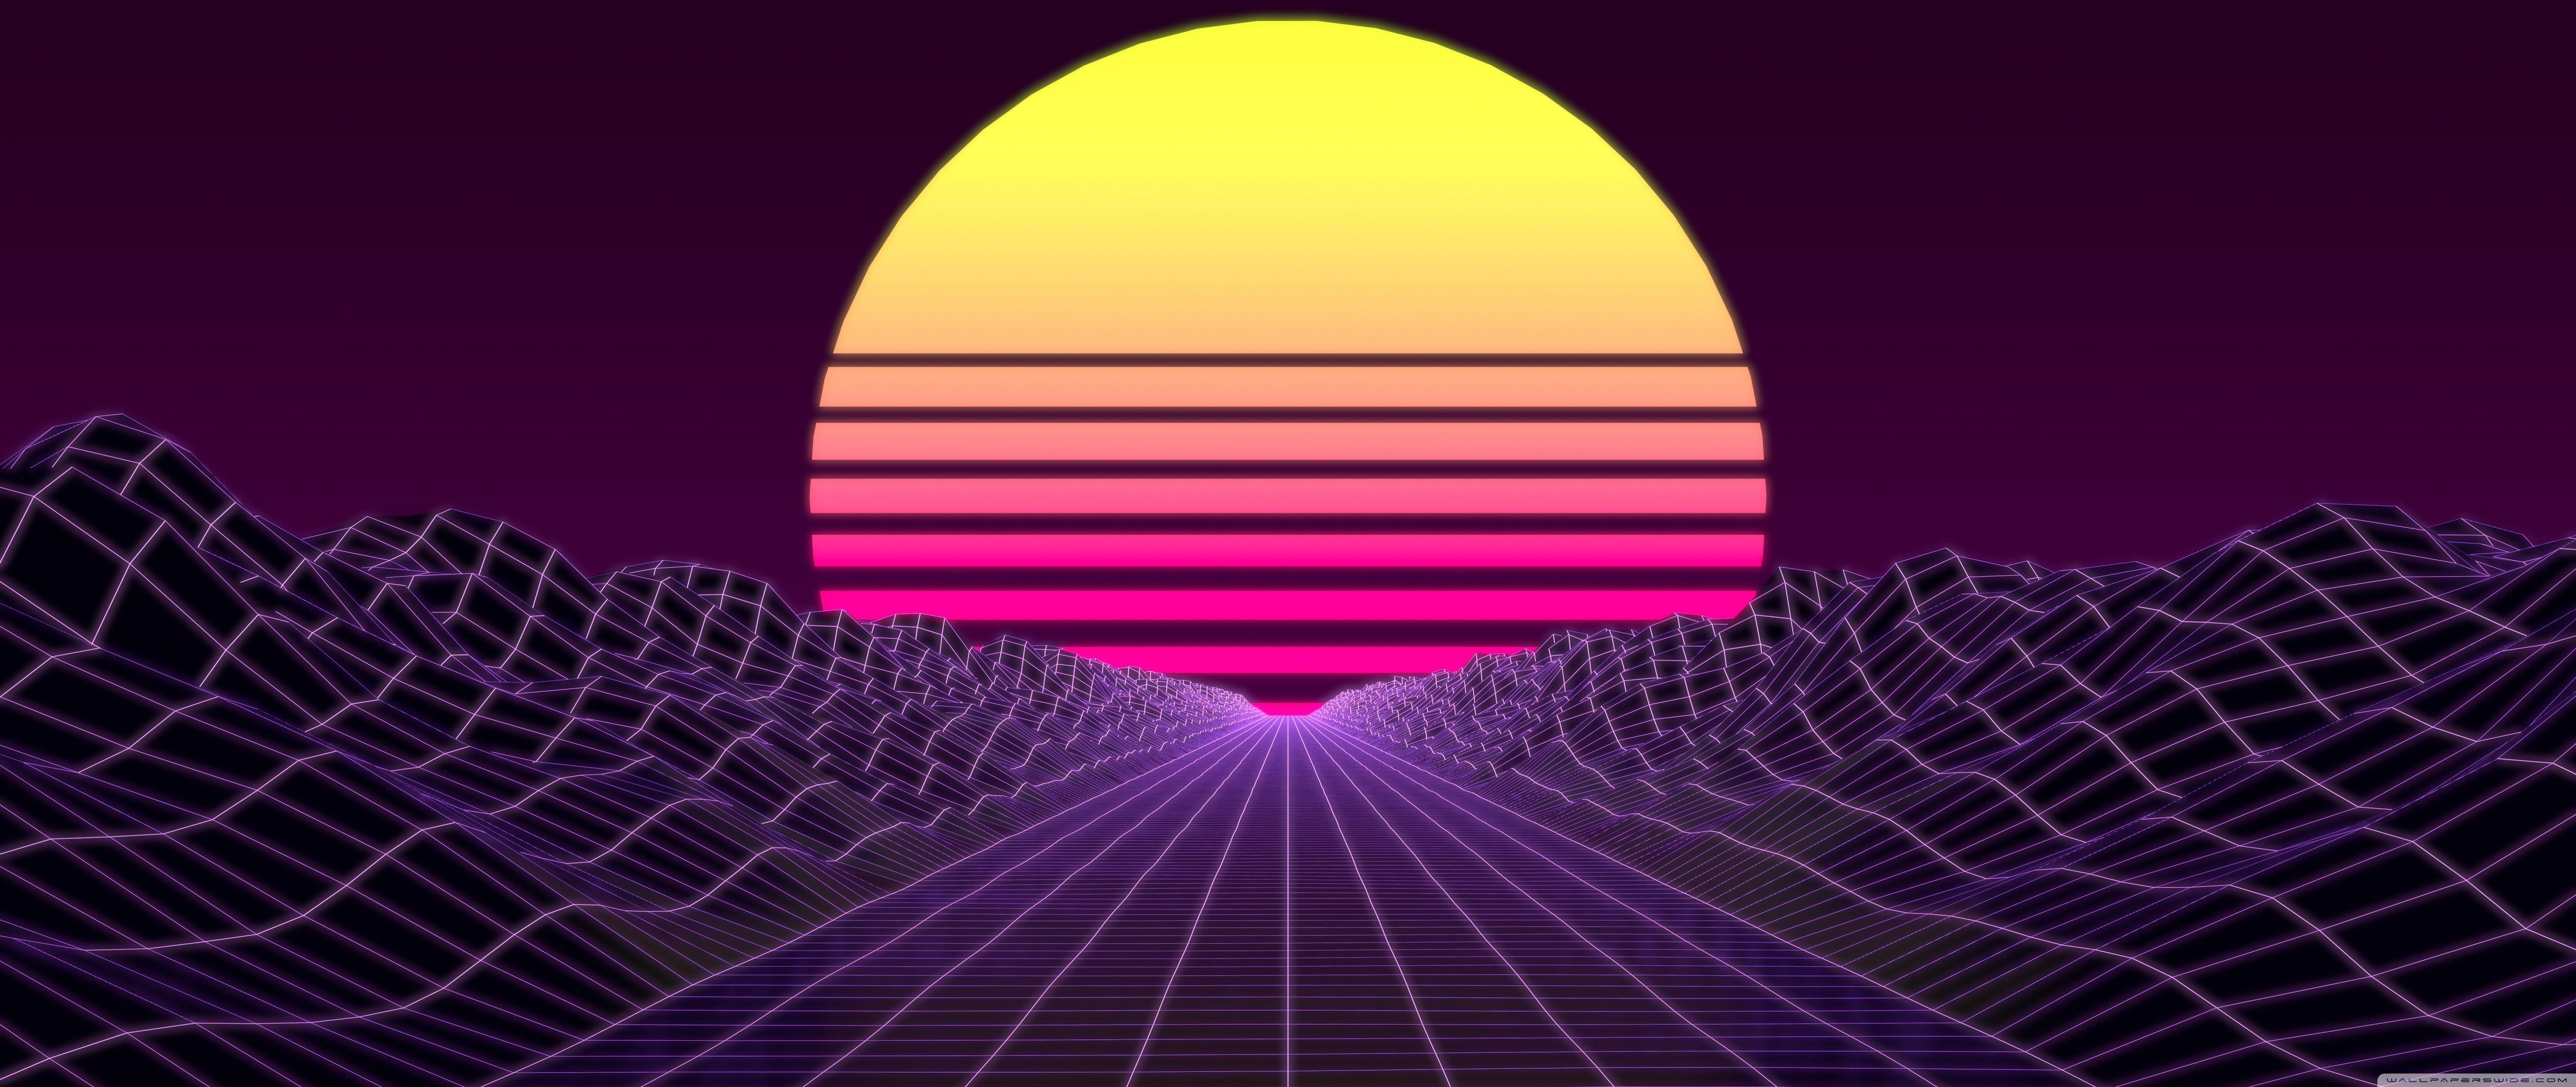 Retro Synthwave Ps4 Wallpapers Wallpapers